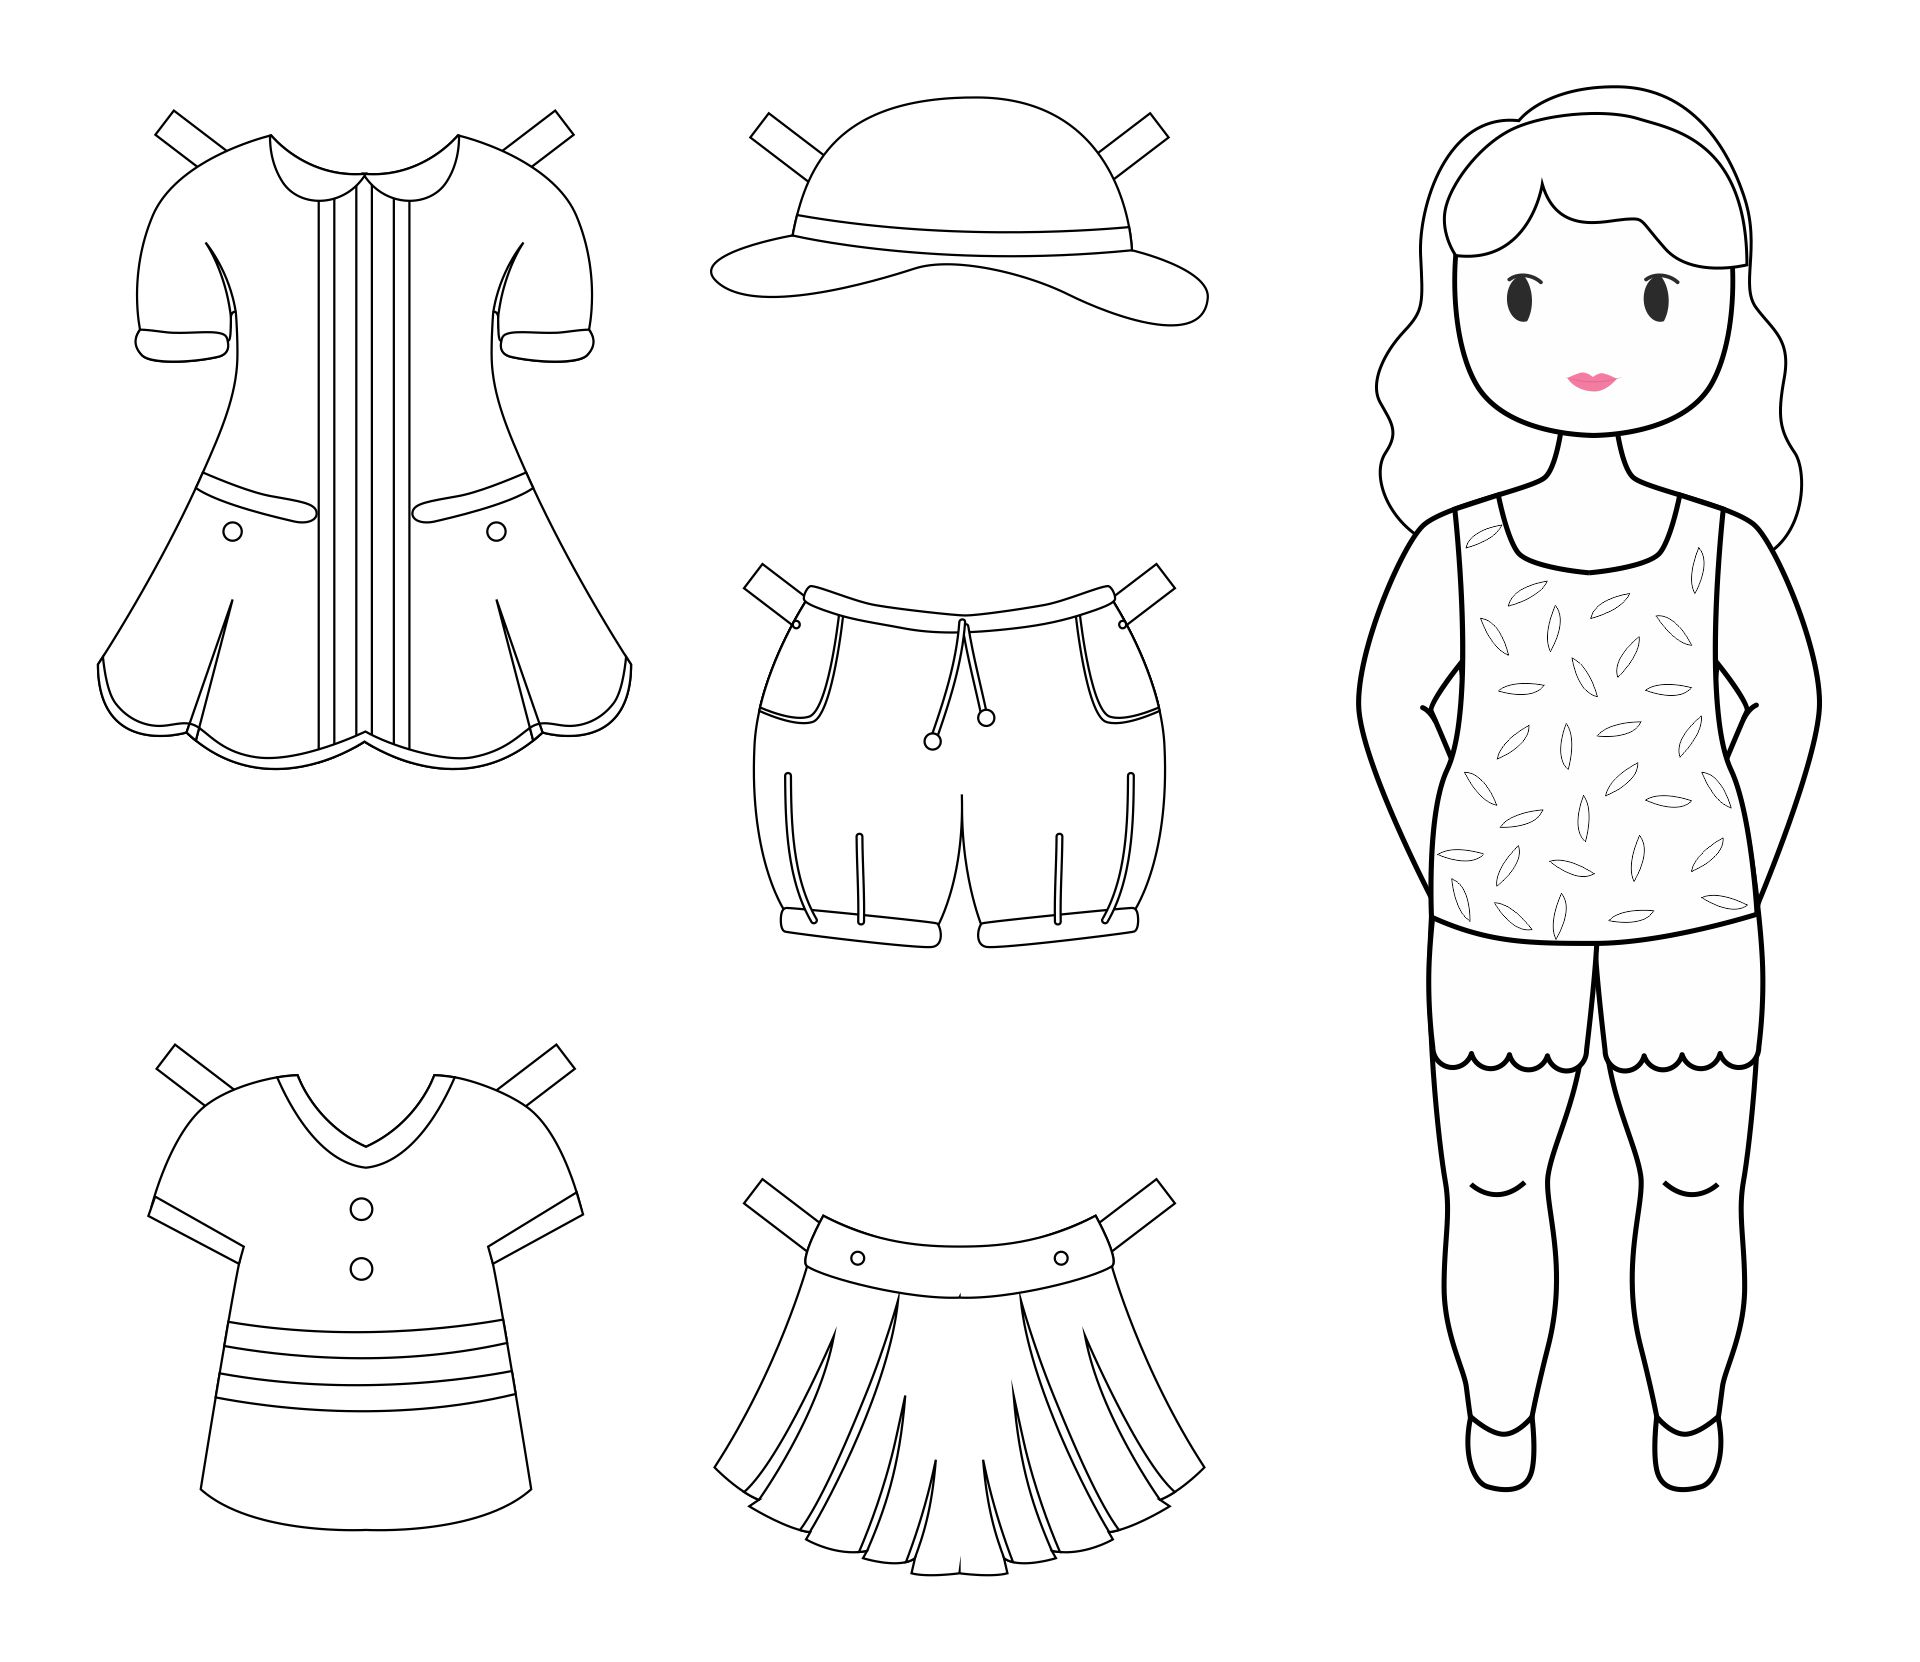 10-best-printable-paper-dolls-to-color-pdf-for-free-at-printablee